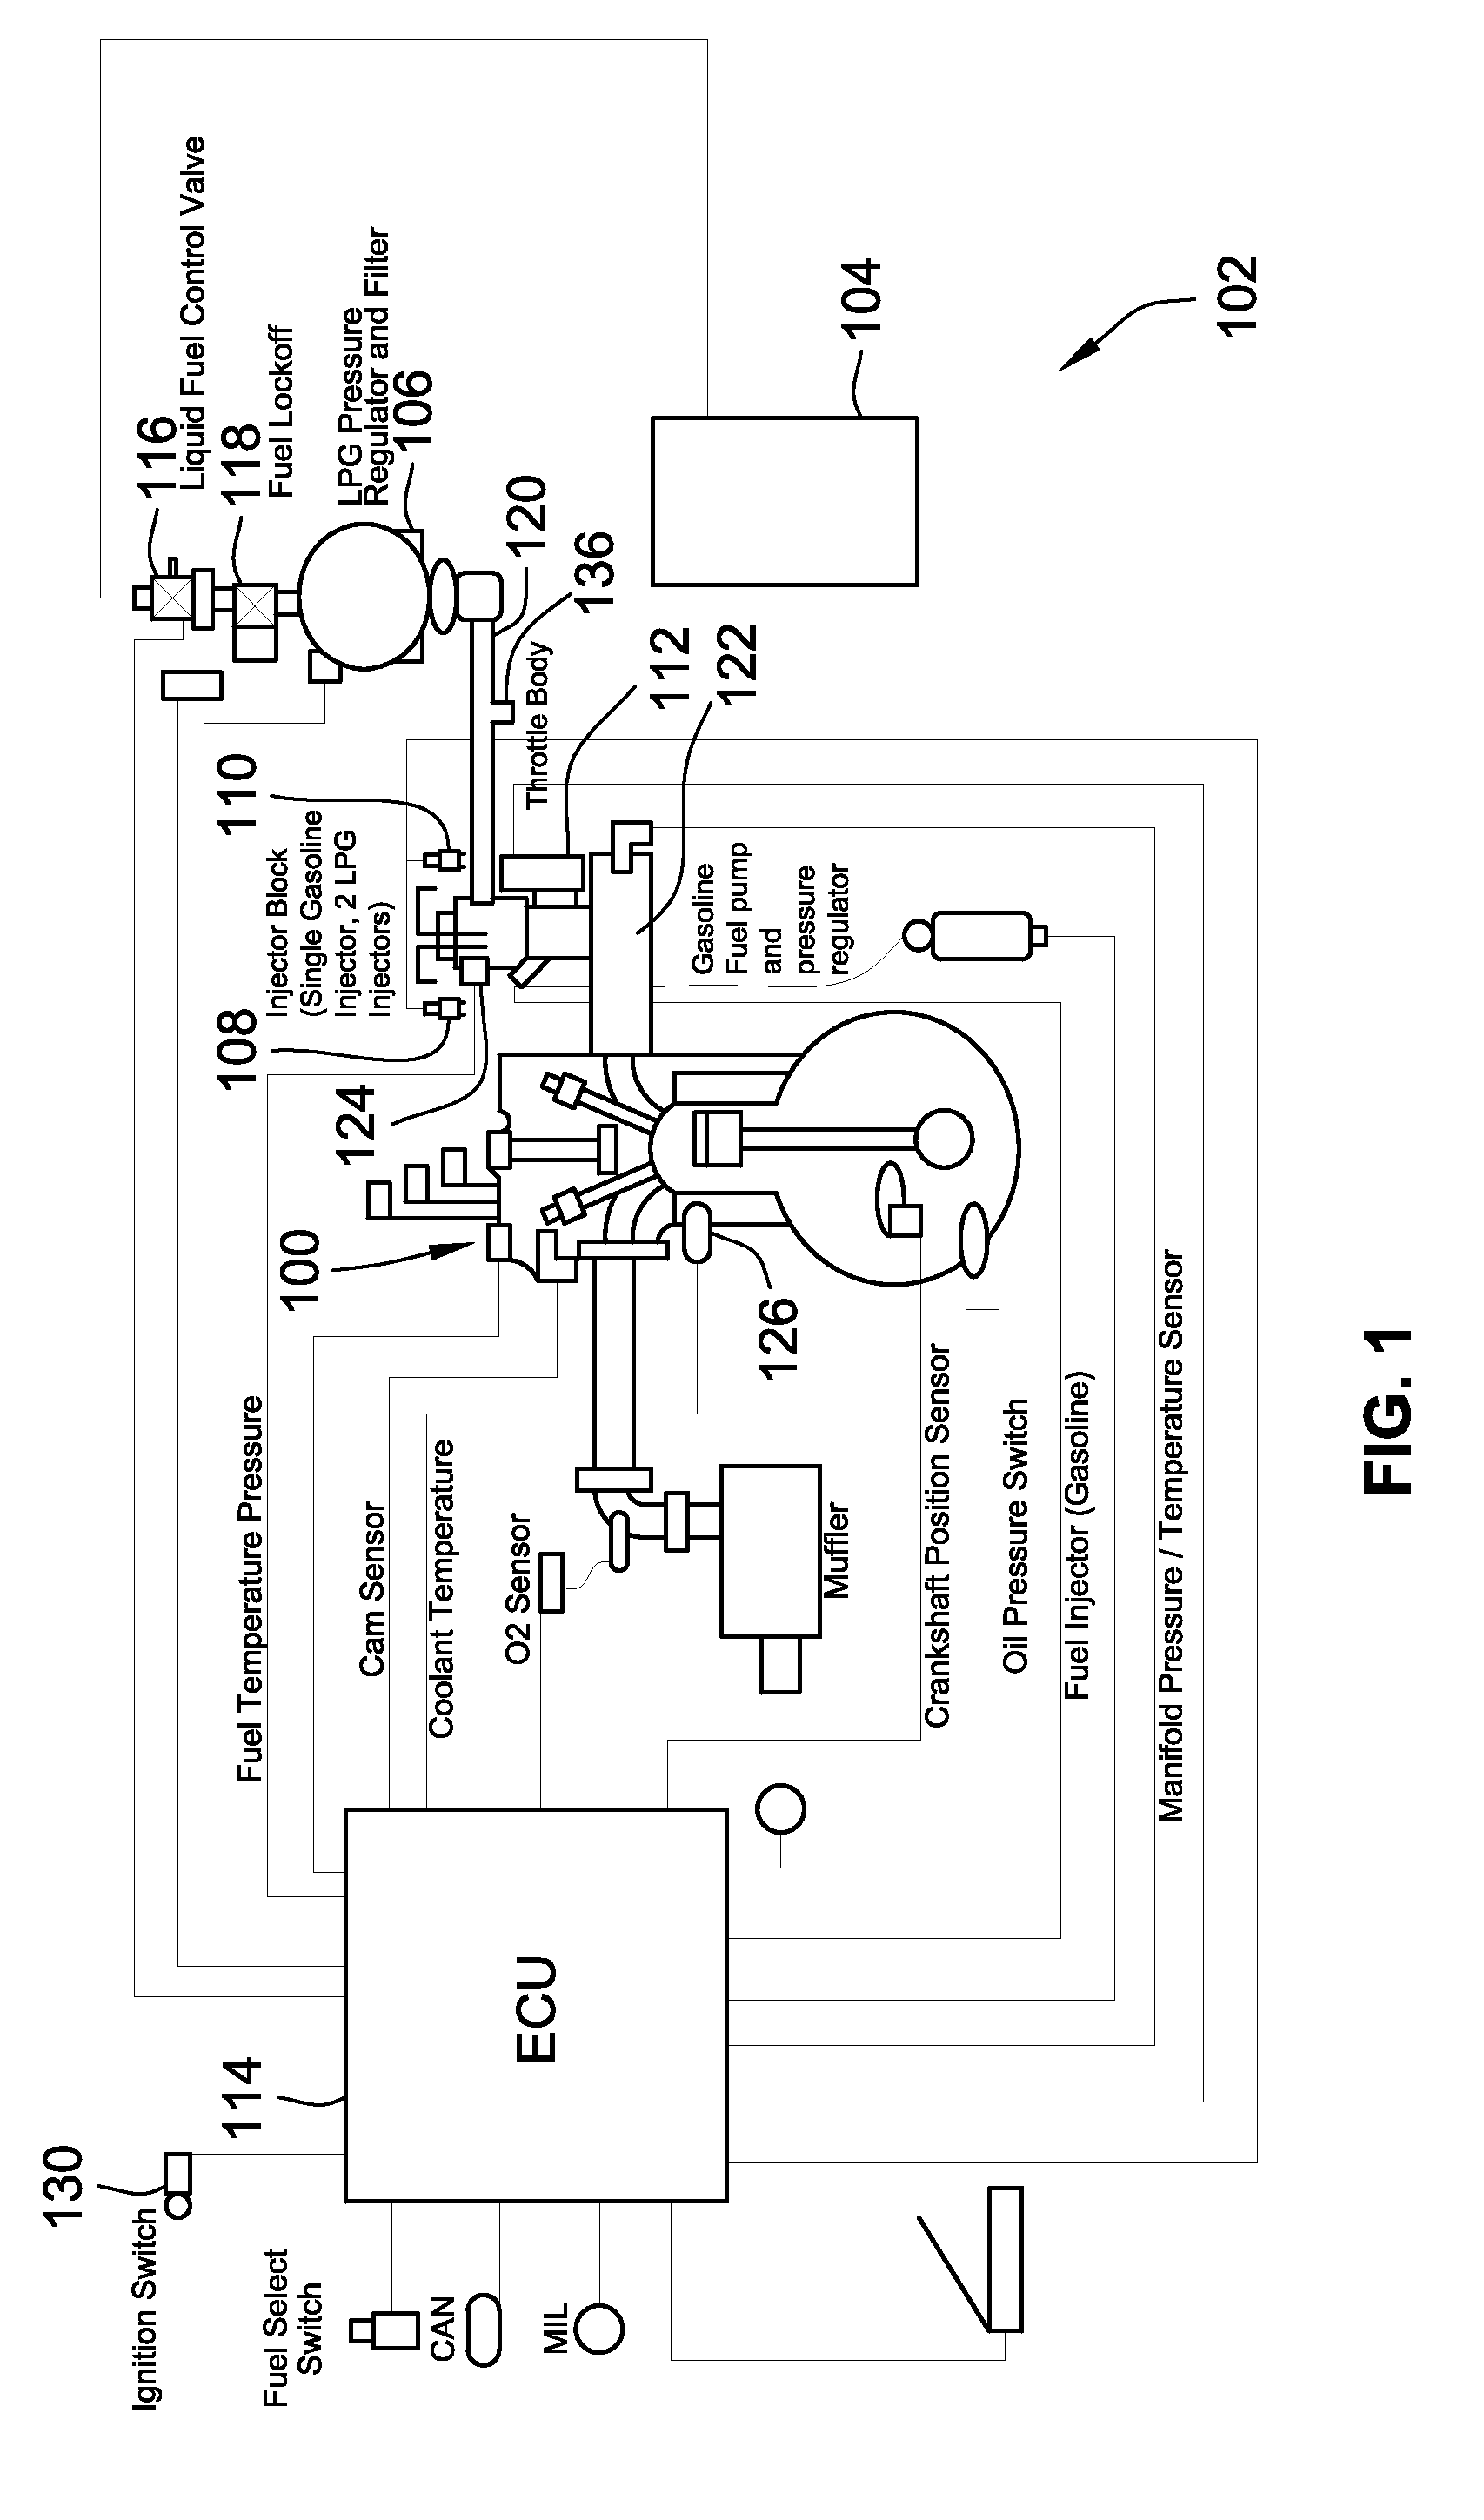 Cold-Start Fuel Control System